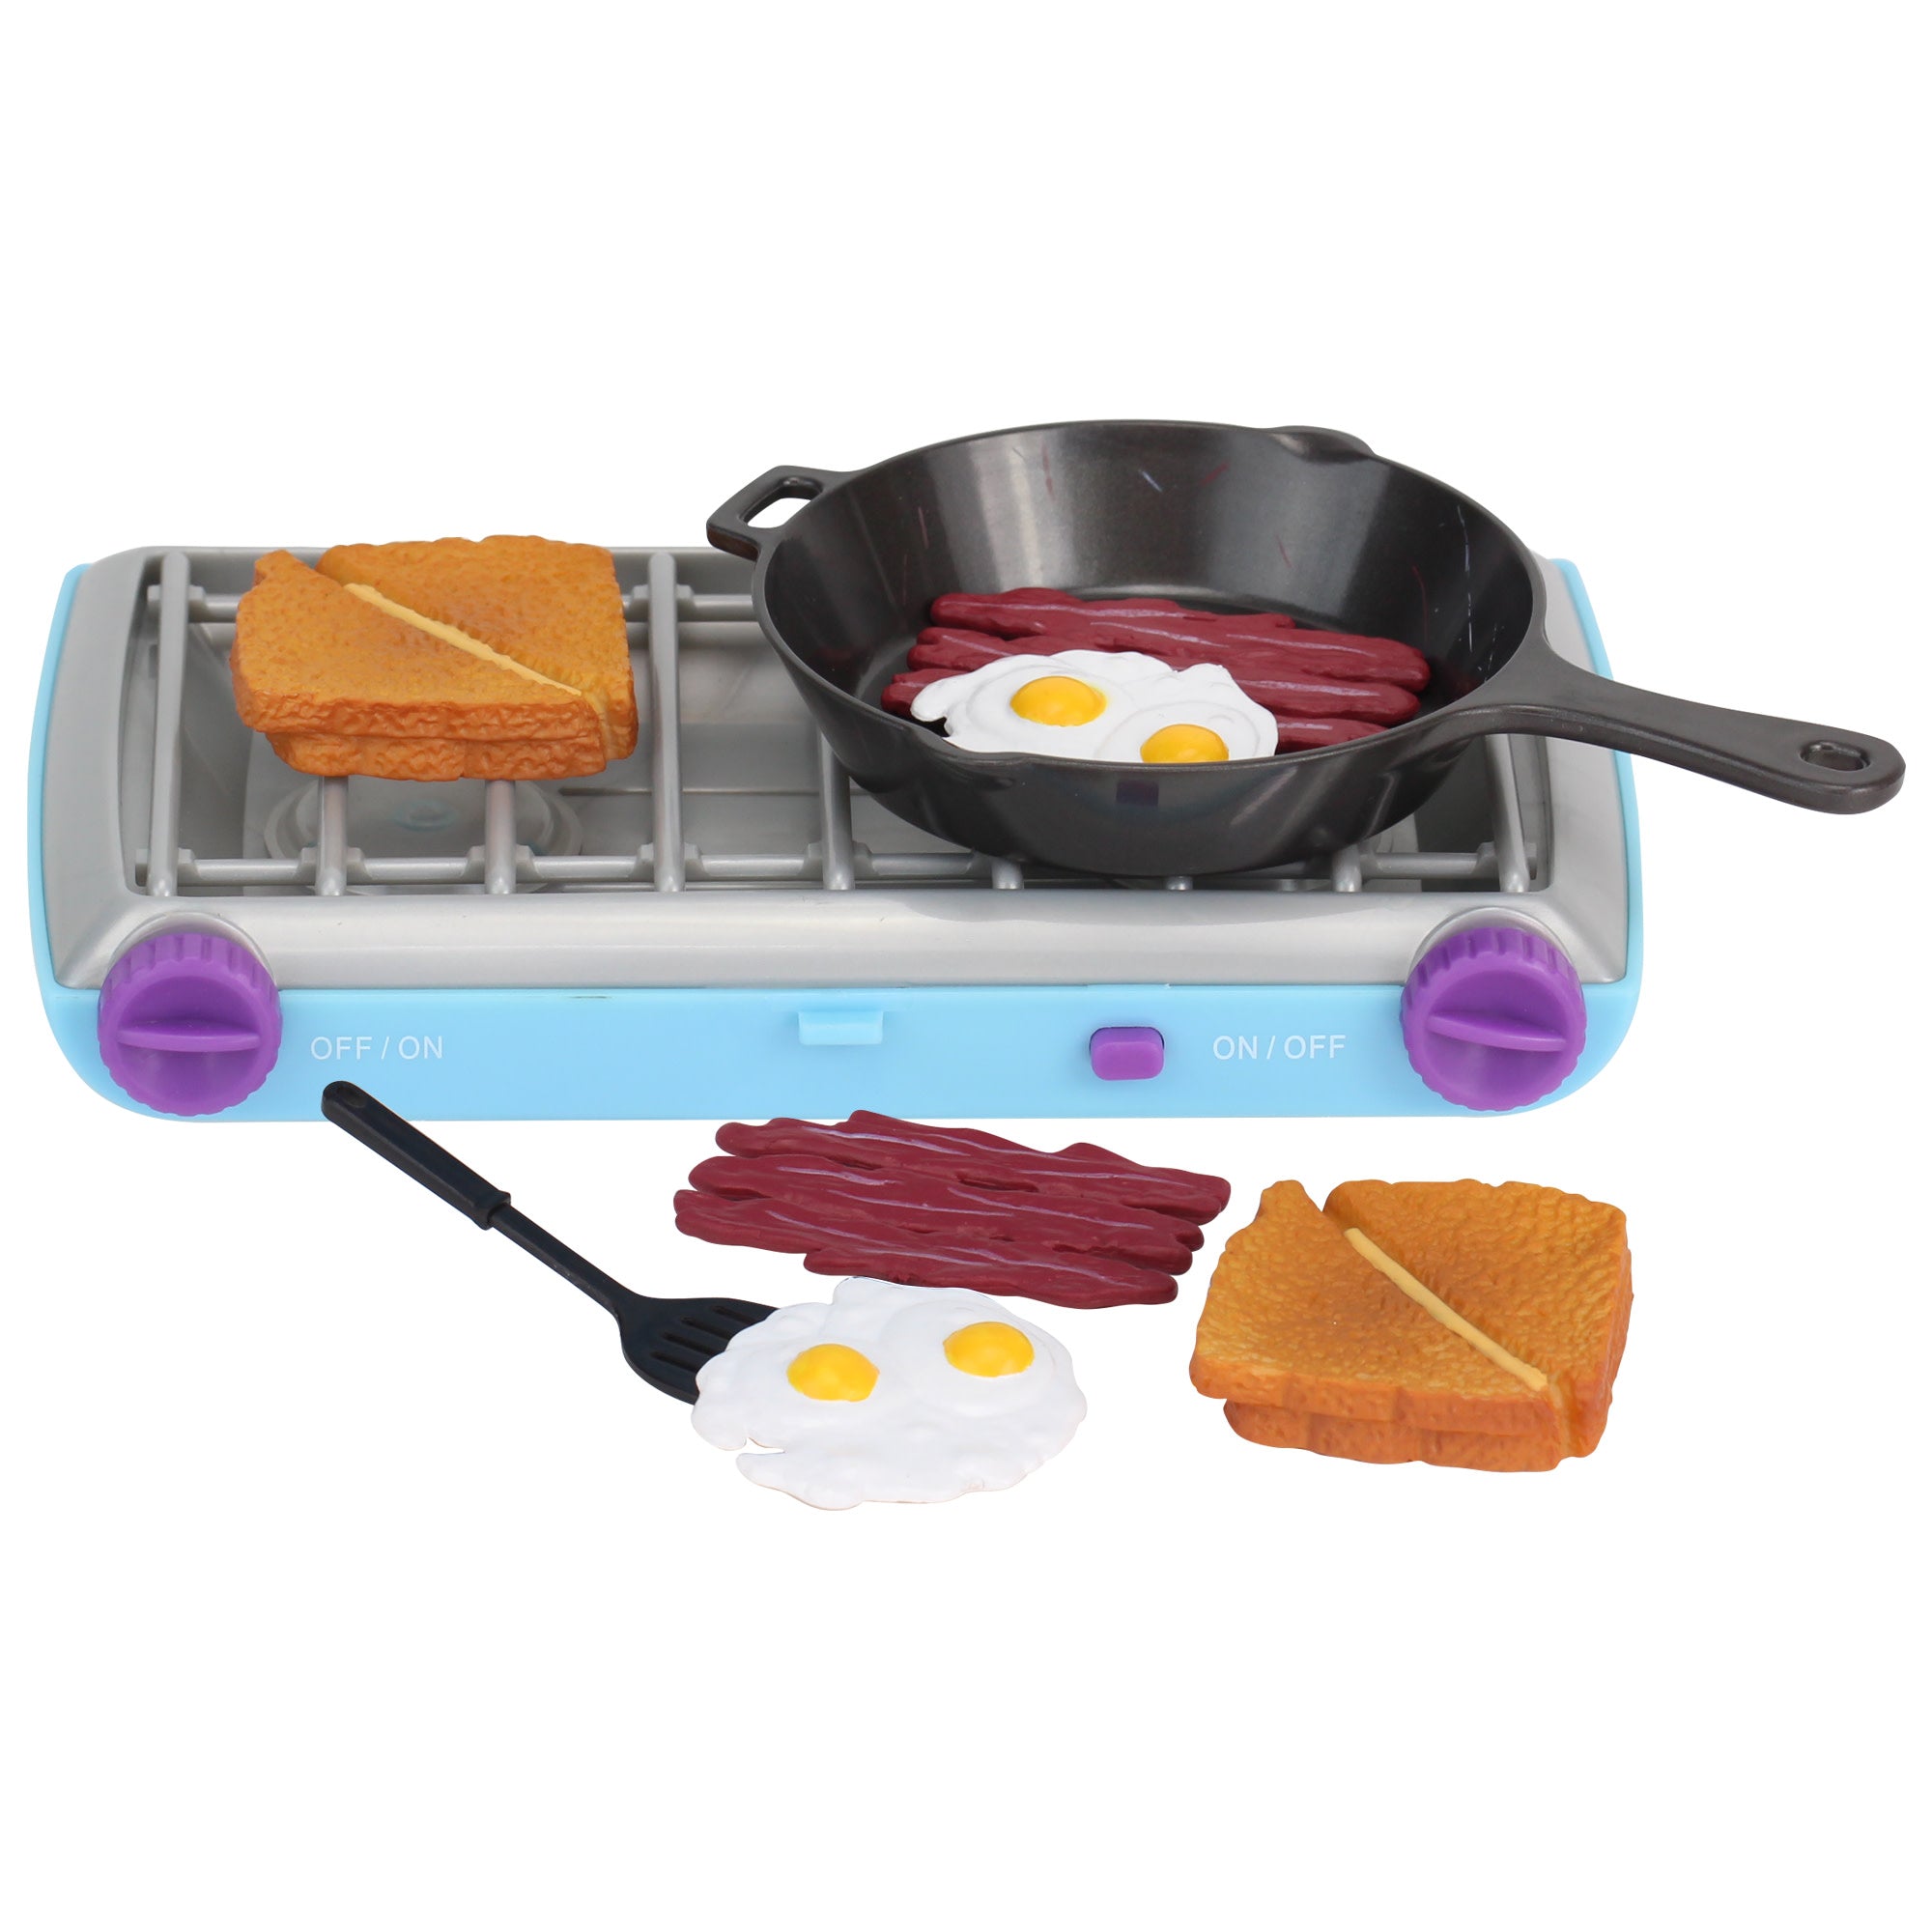 Sophia's 9 Piece Camp Stove and Food Set for 18" Dolls, Multicolor